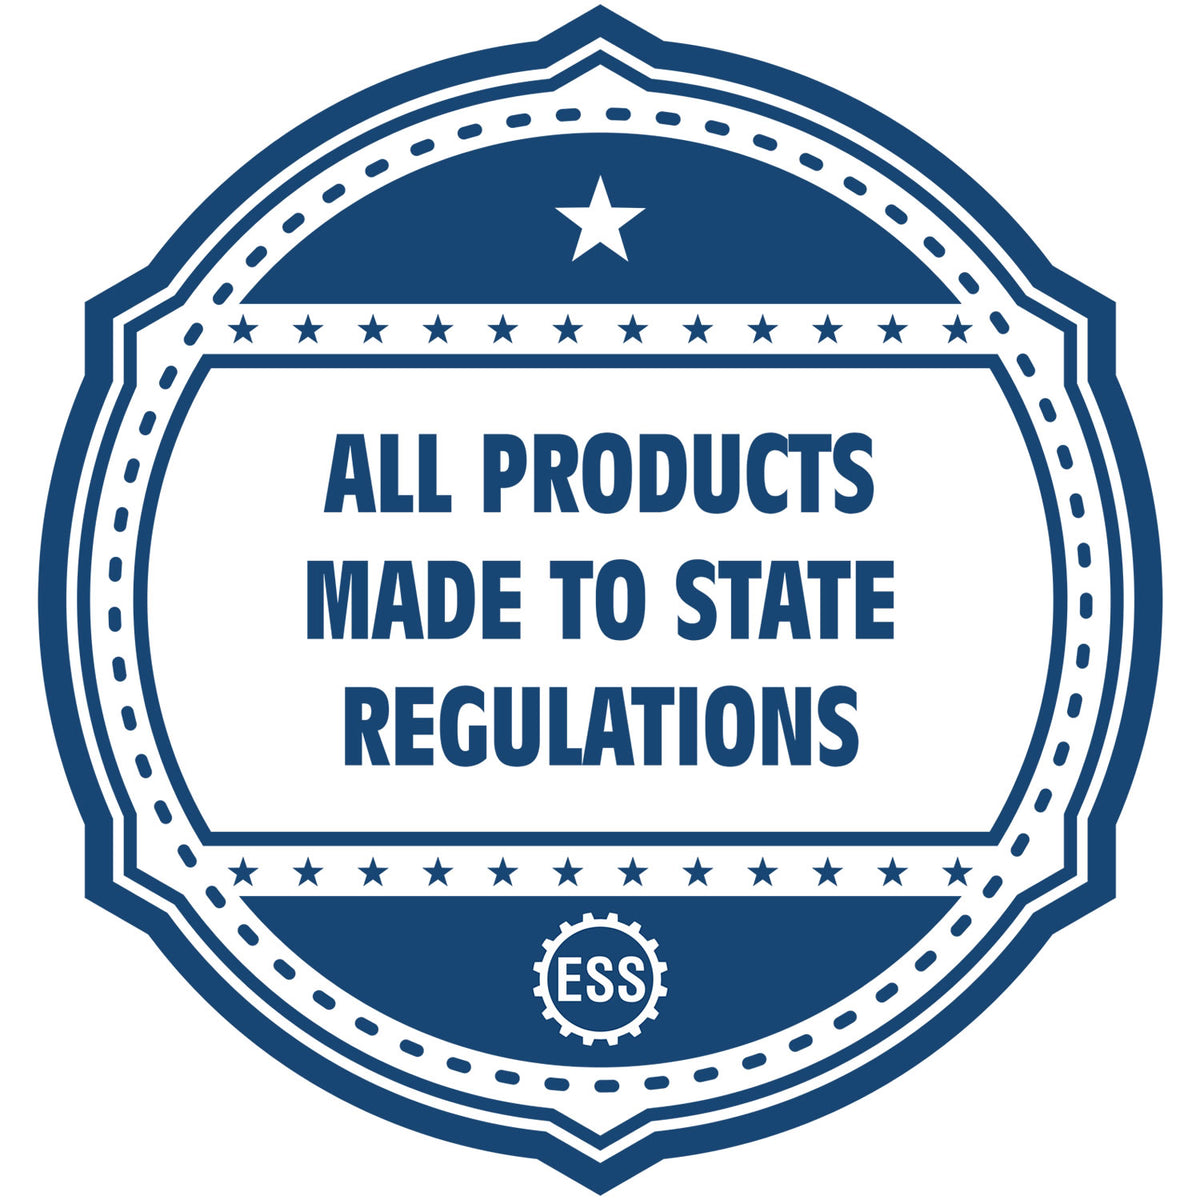 An icon or badge element for the Heavy-Duty Alabama Rectangular Notary Stamp showing that this product is made in compliance with state regulations.